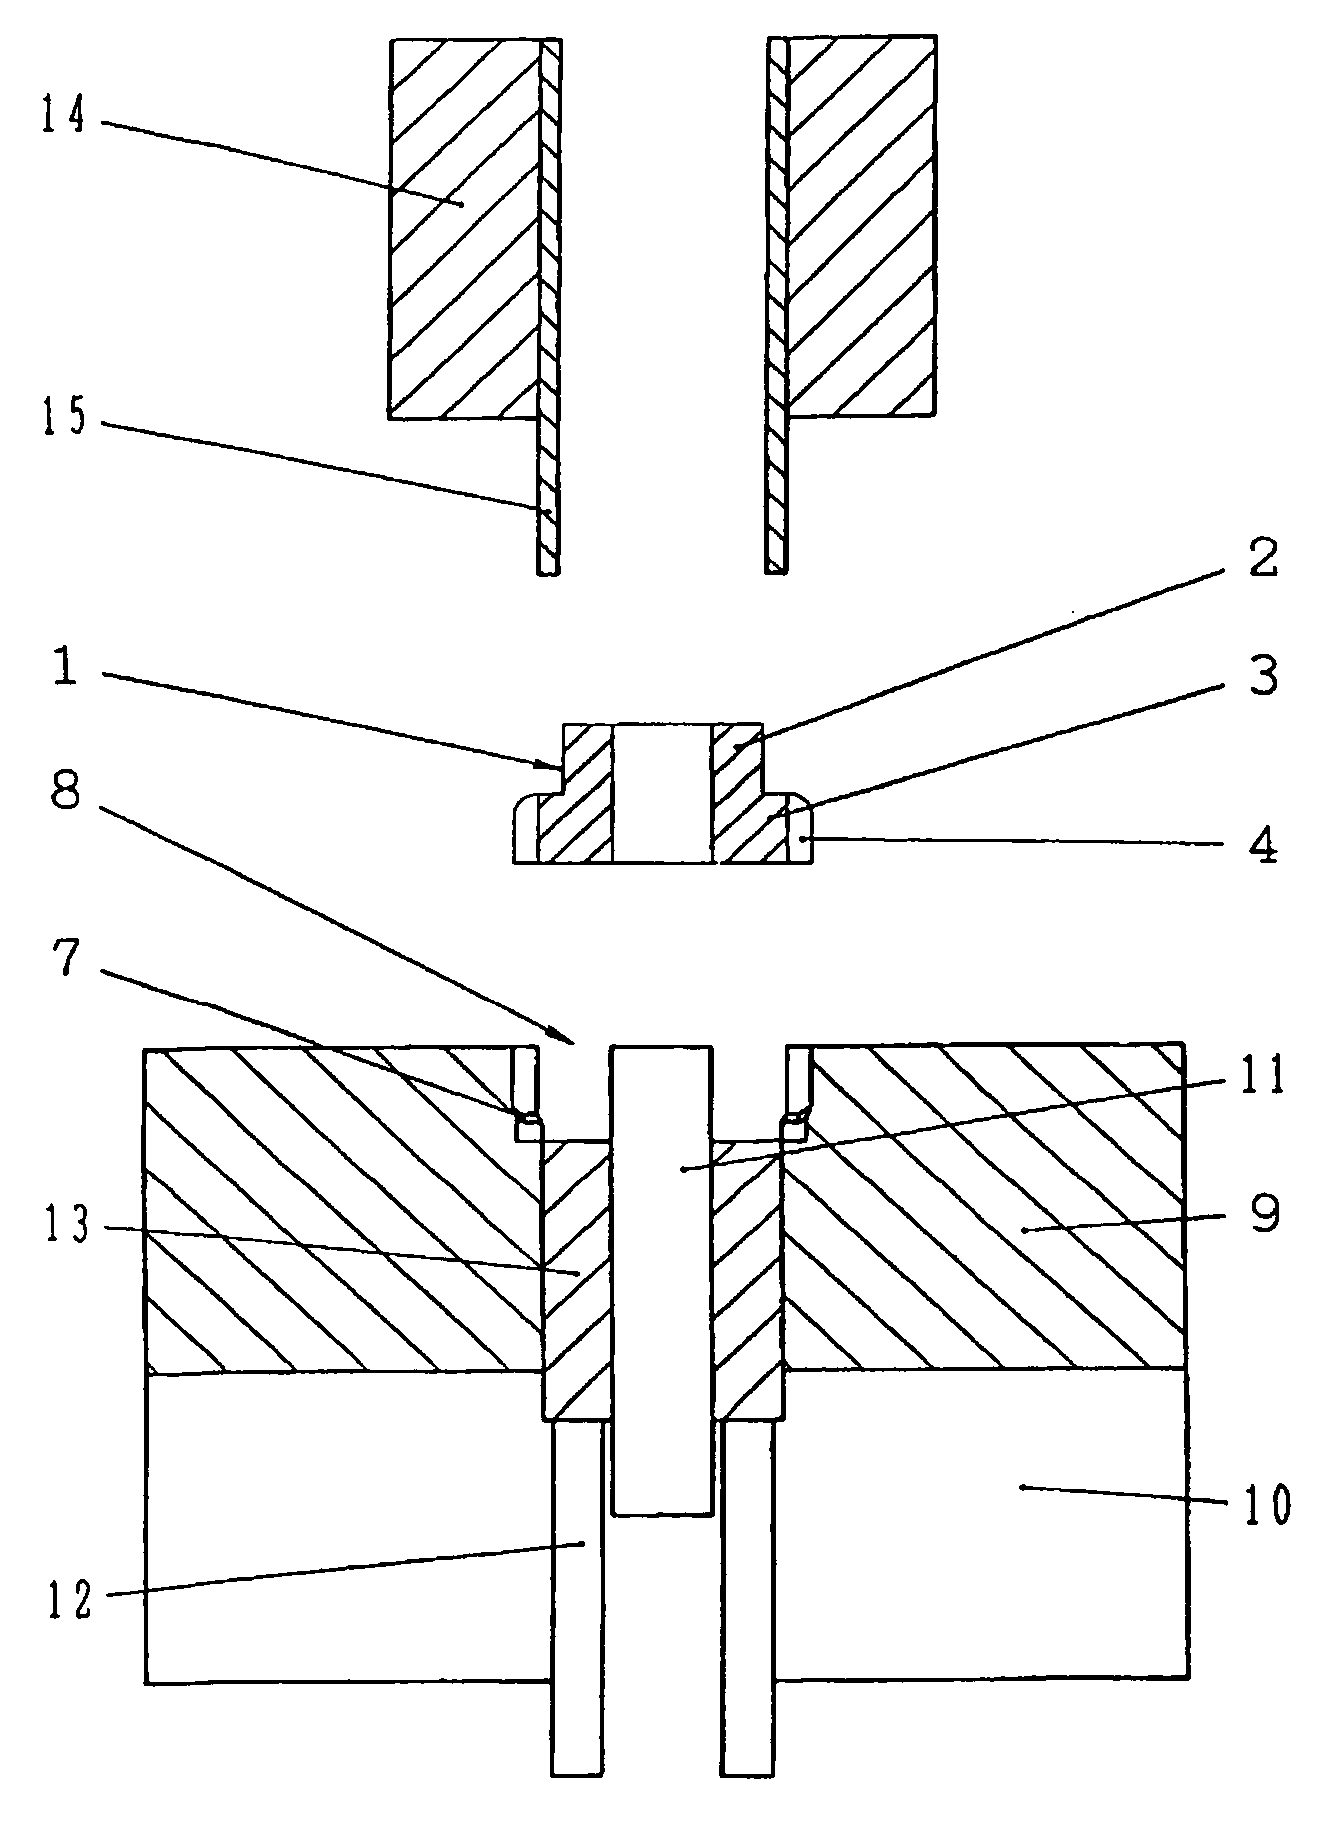 Gear, and method and apparatus for manufacturing the same